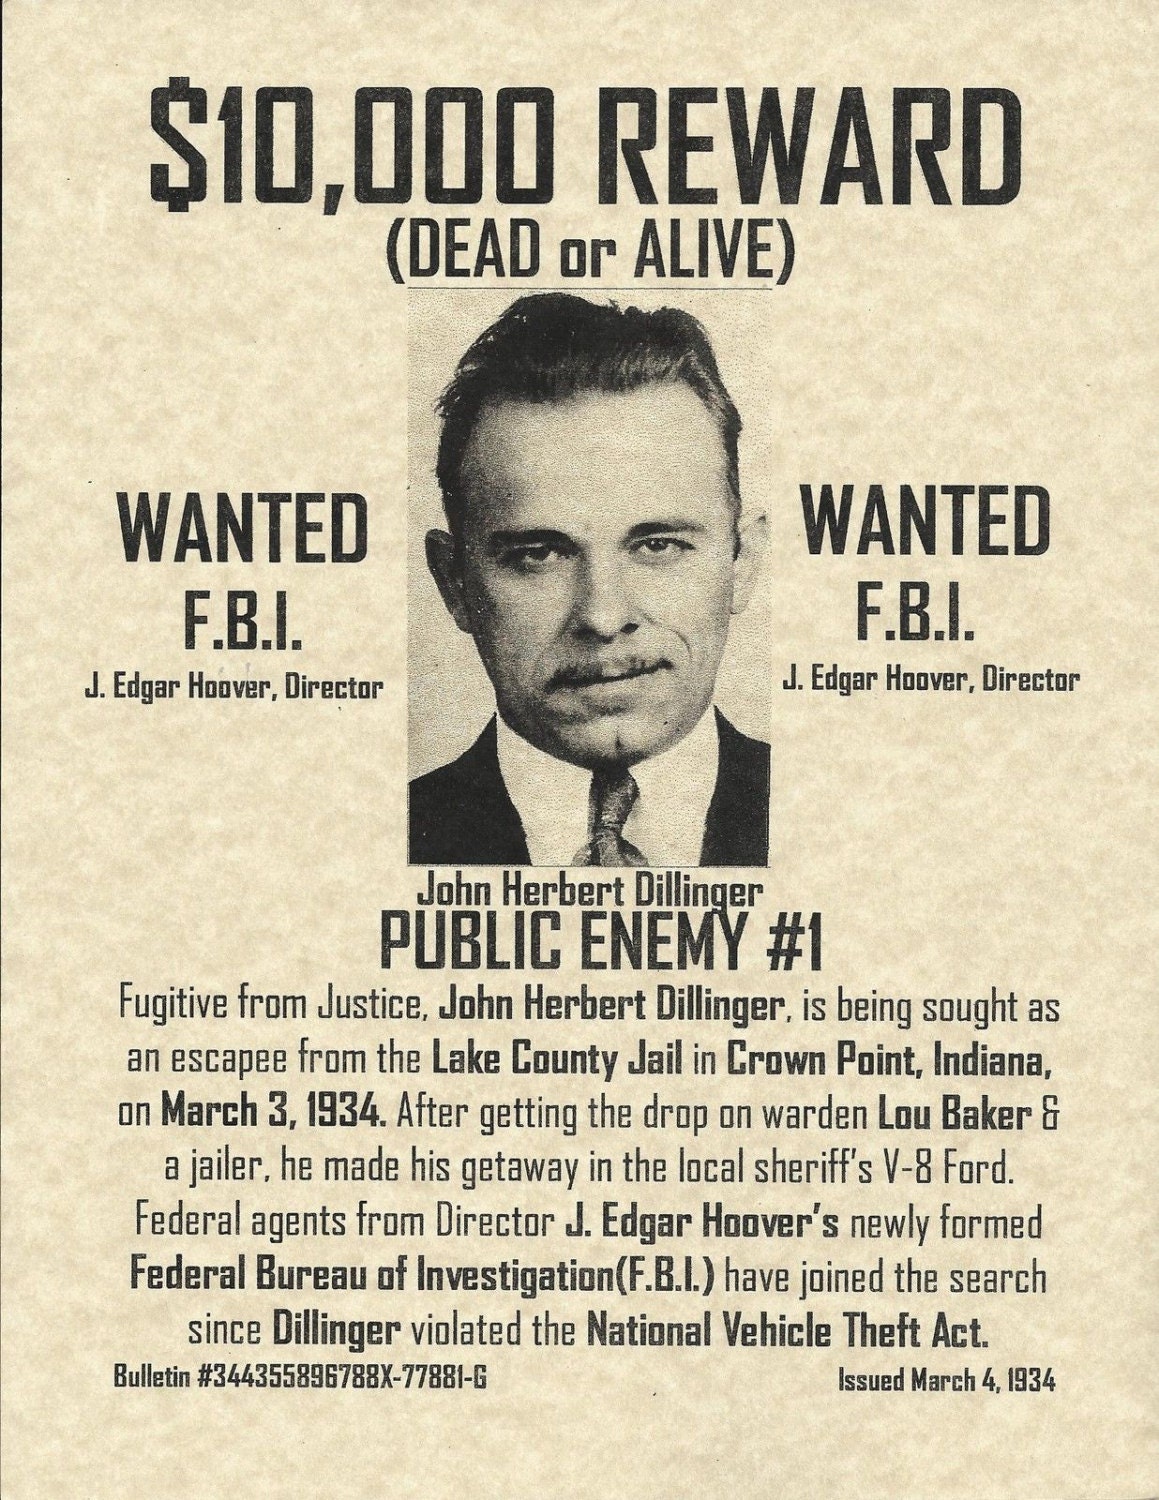 john dillinger handmade set of 5 posters by chickenfoots on Etsy